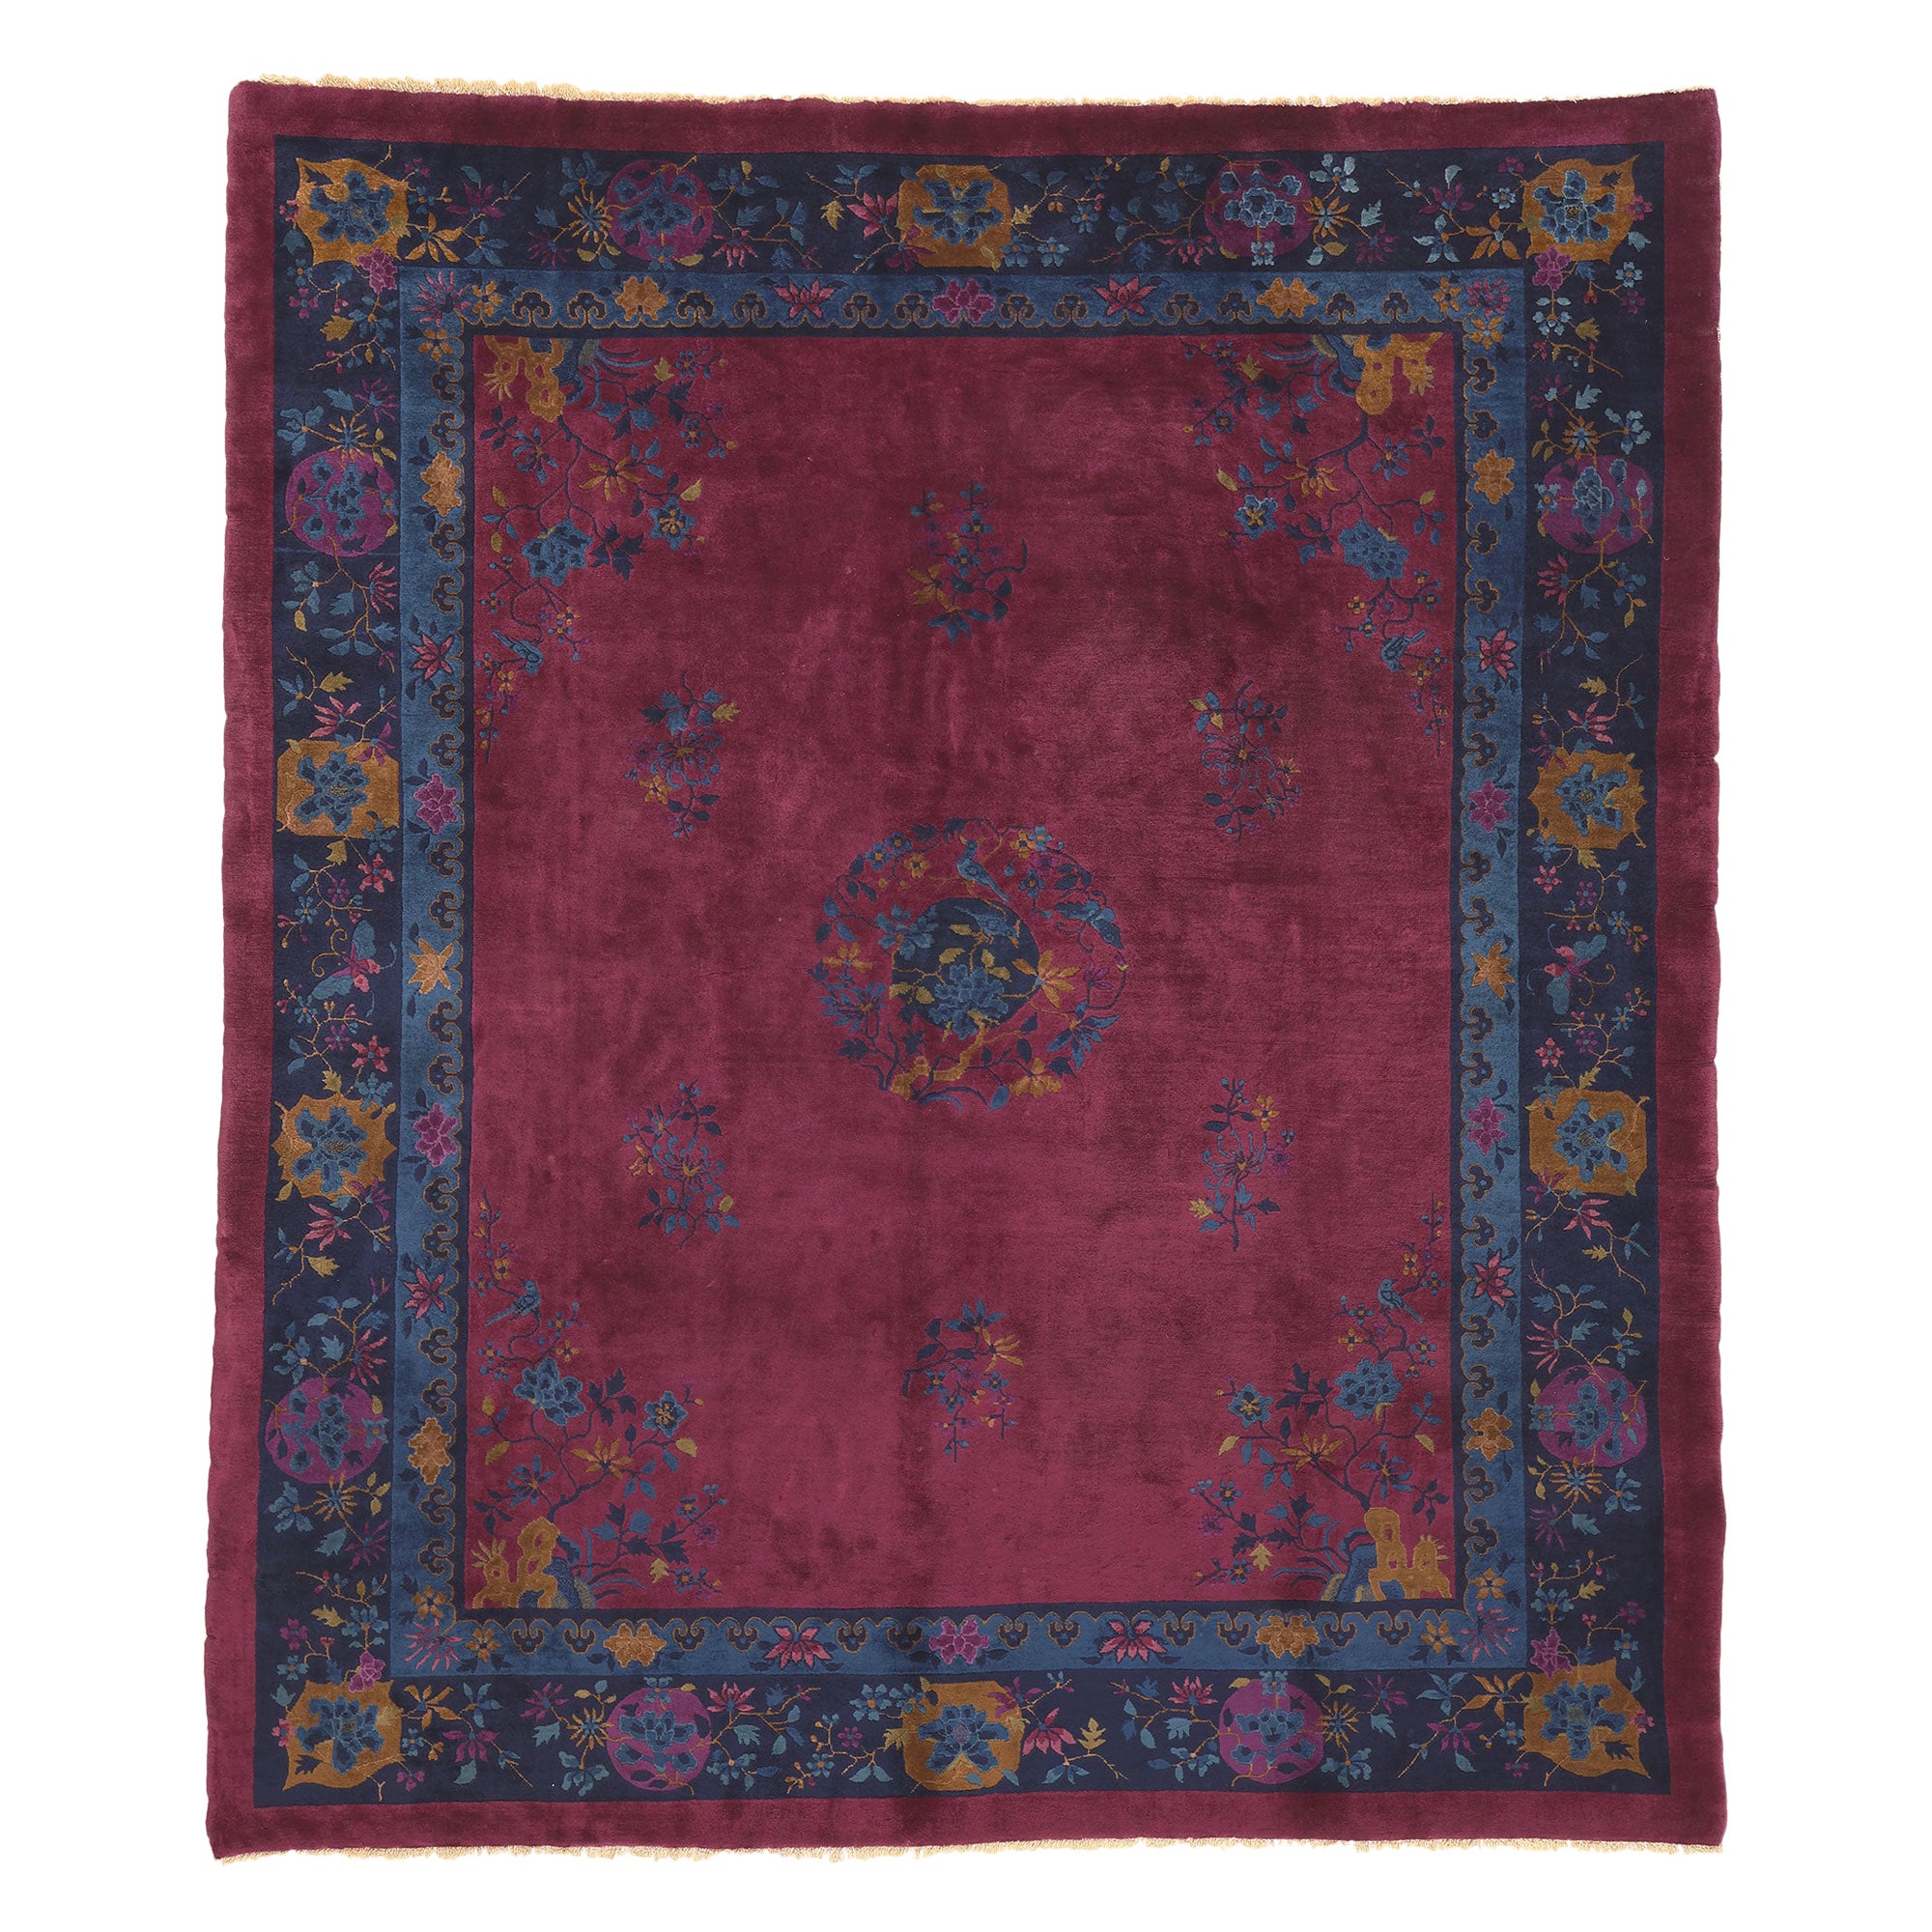 Antique Chinese Art Deco Rug, Maximalist Style Meets Sensual Decadence For Sale